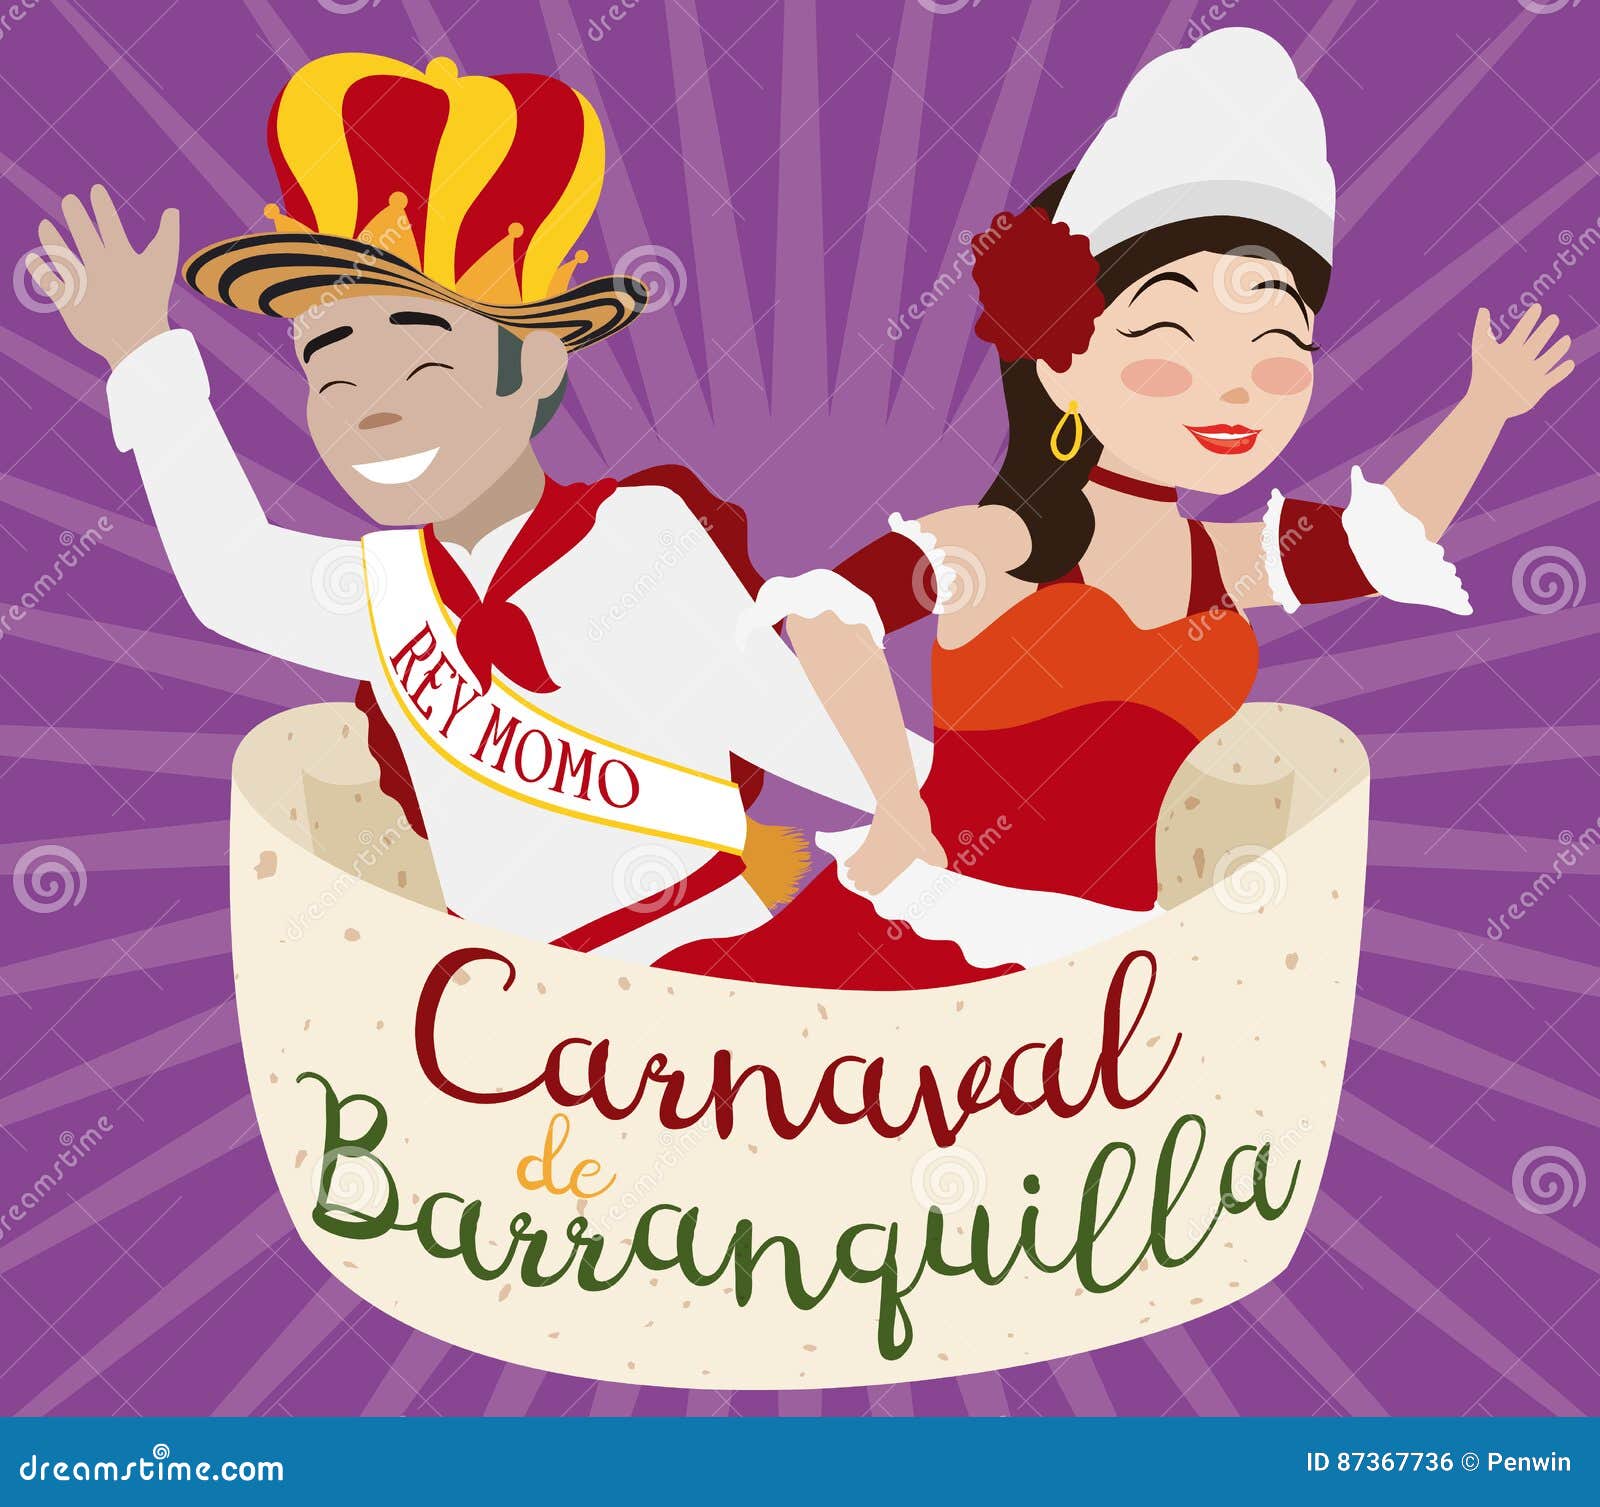 queen and king of barranquilla`s carnival with the royal proclamation,  